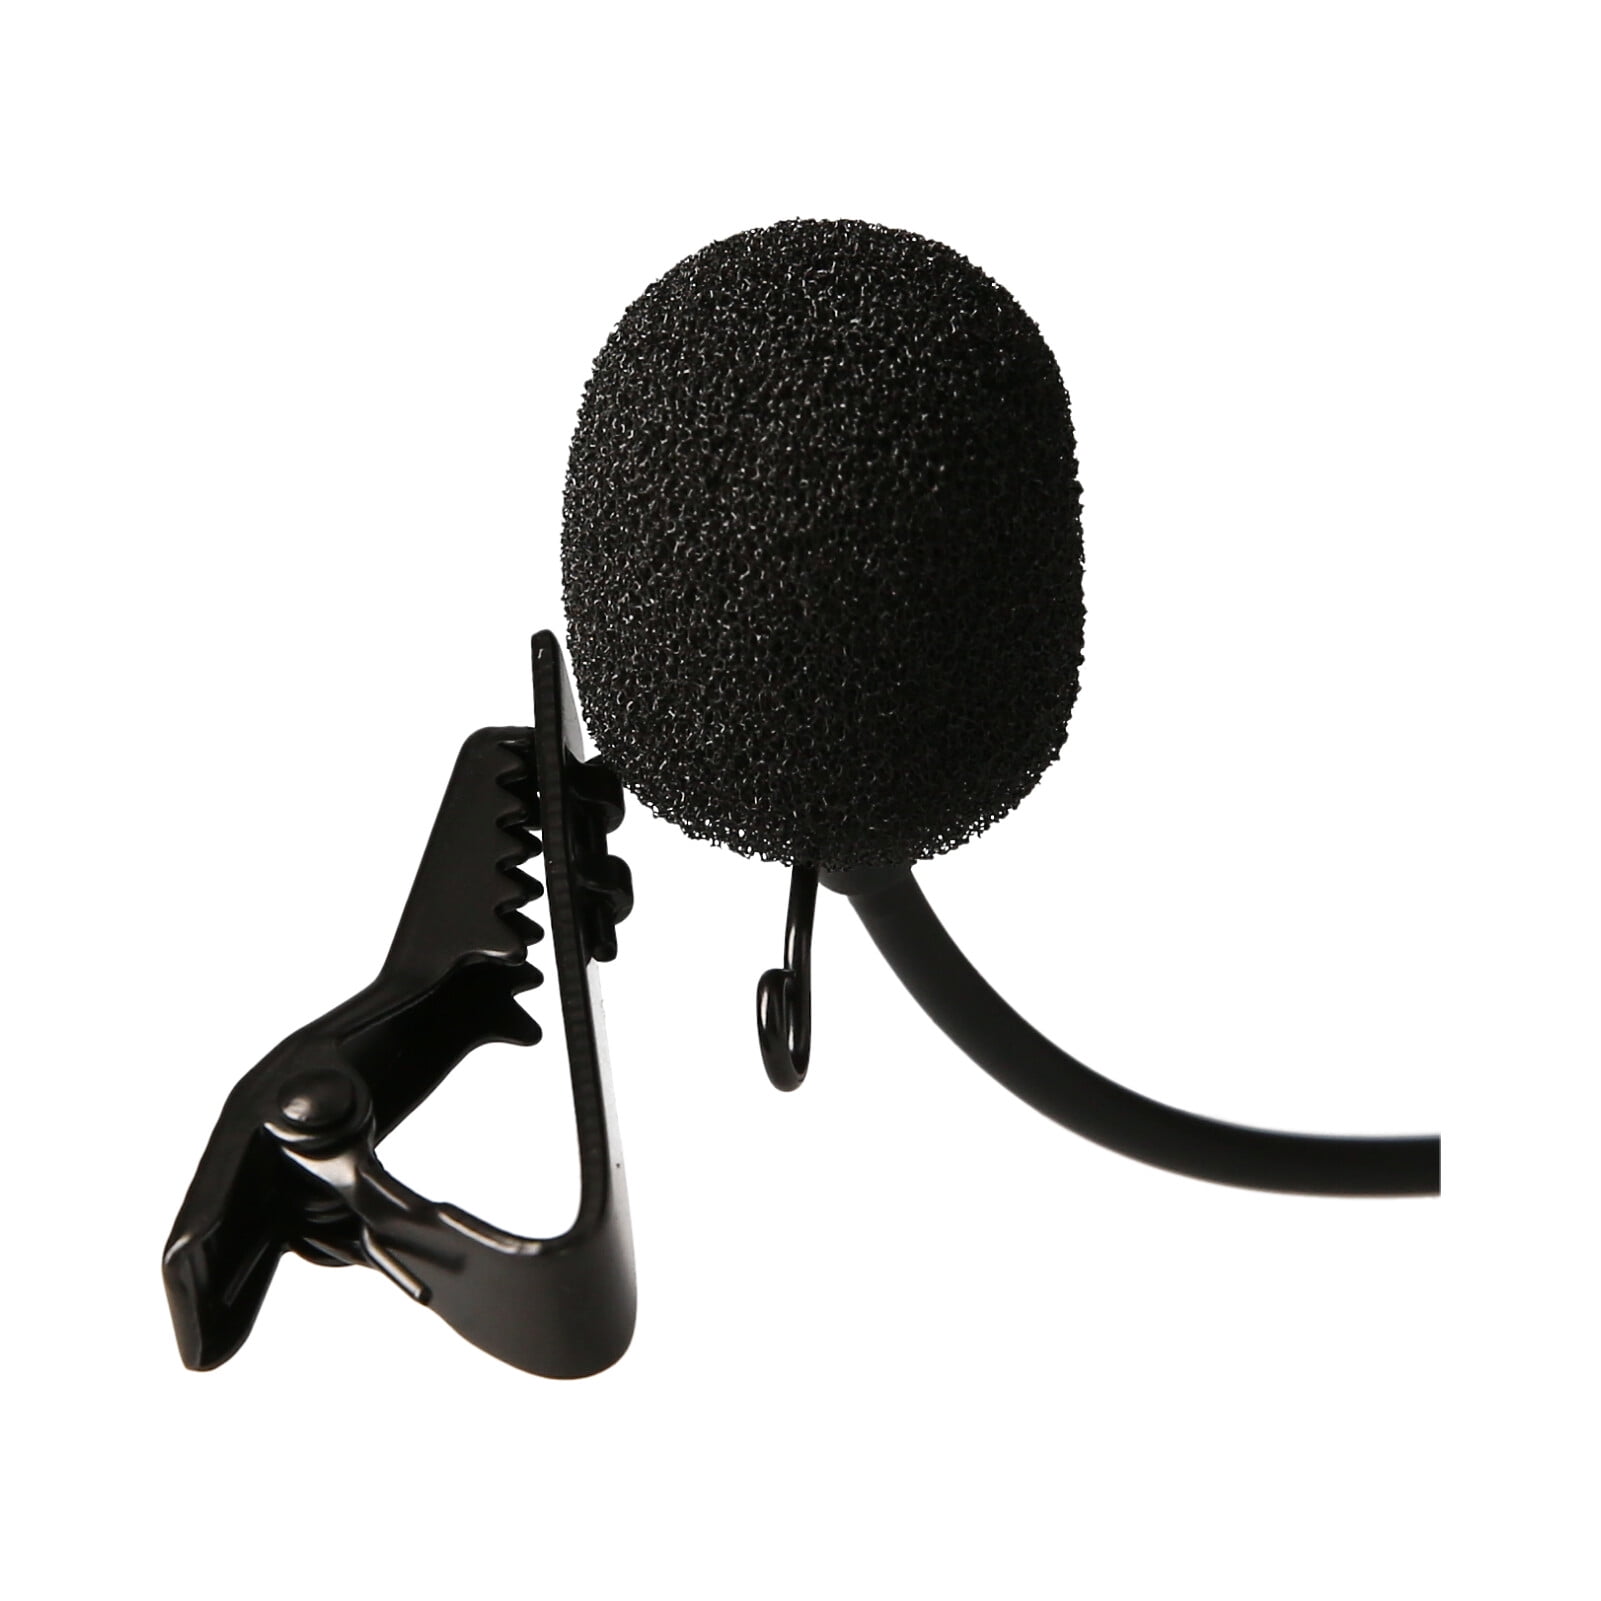 Ubeesize Professional Clip on Omnidirectional Dual Condenser Lav Mic,Perfect for YouTube Recording/Interview/Video Conference/Podcast Lavalier Lapel Microphone E 